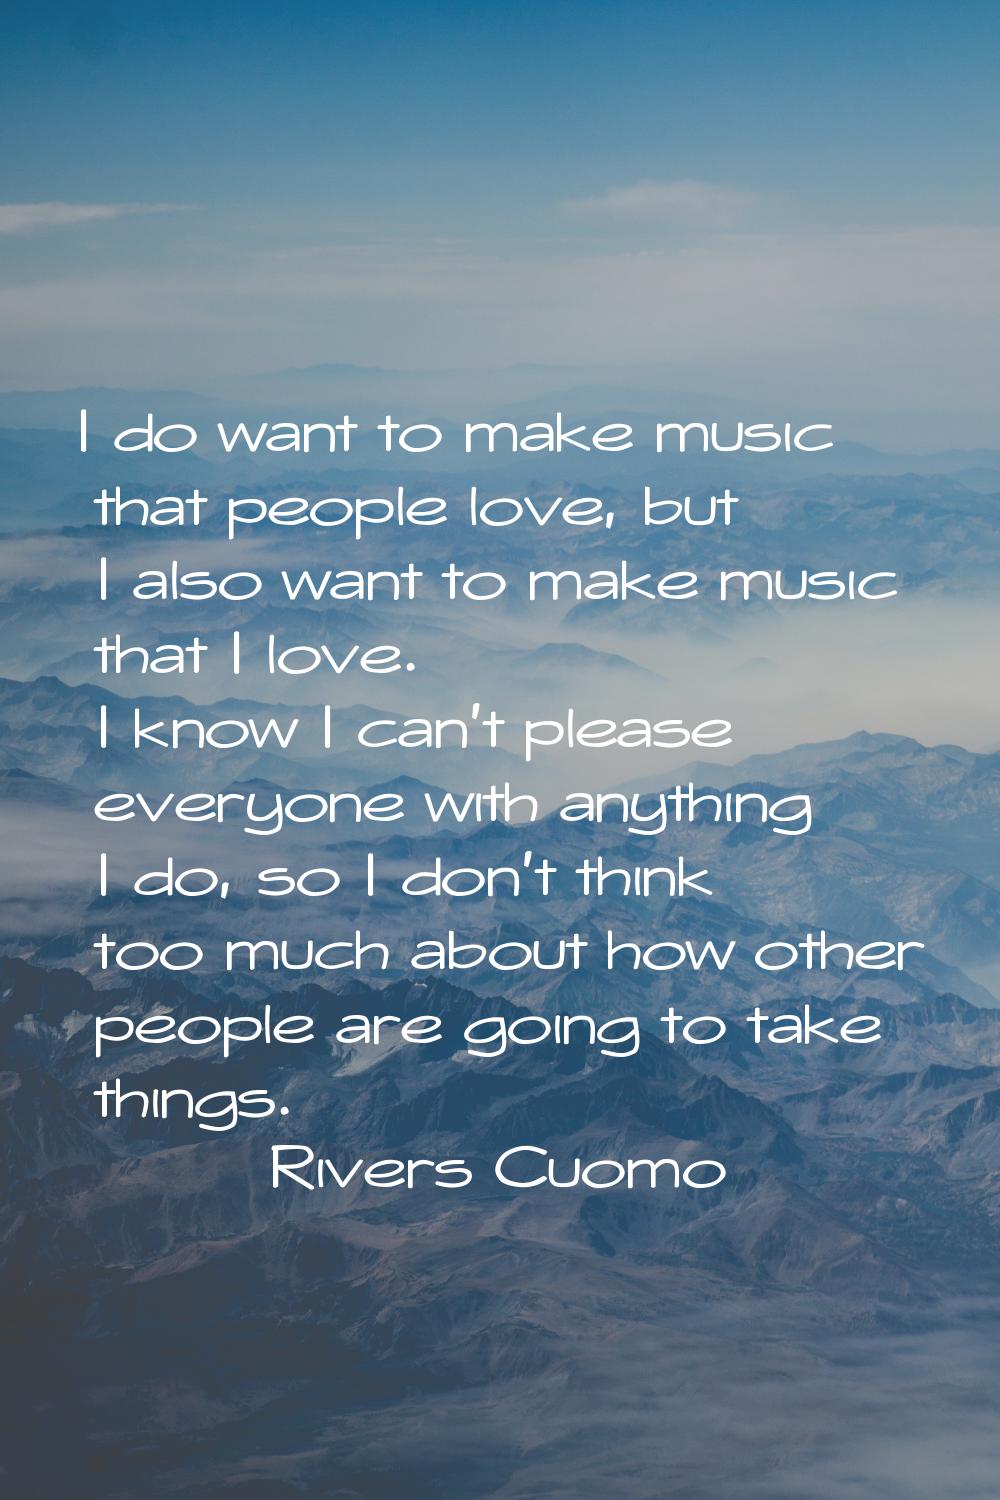 I do want to make music that people love, but I also want to make music that I love. I know I can't